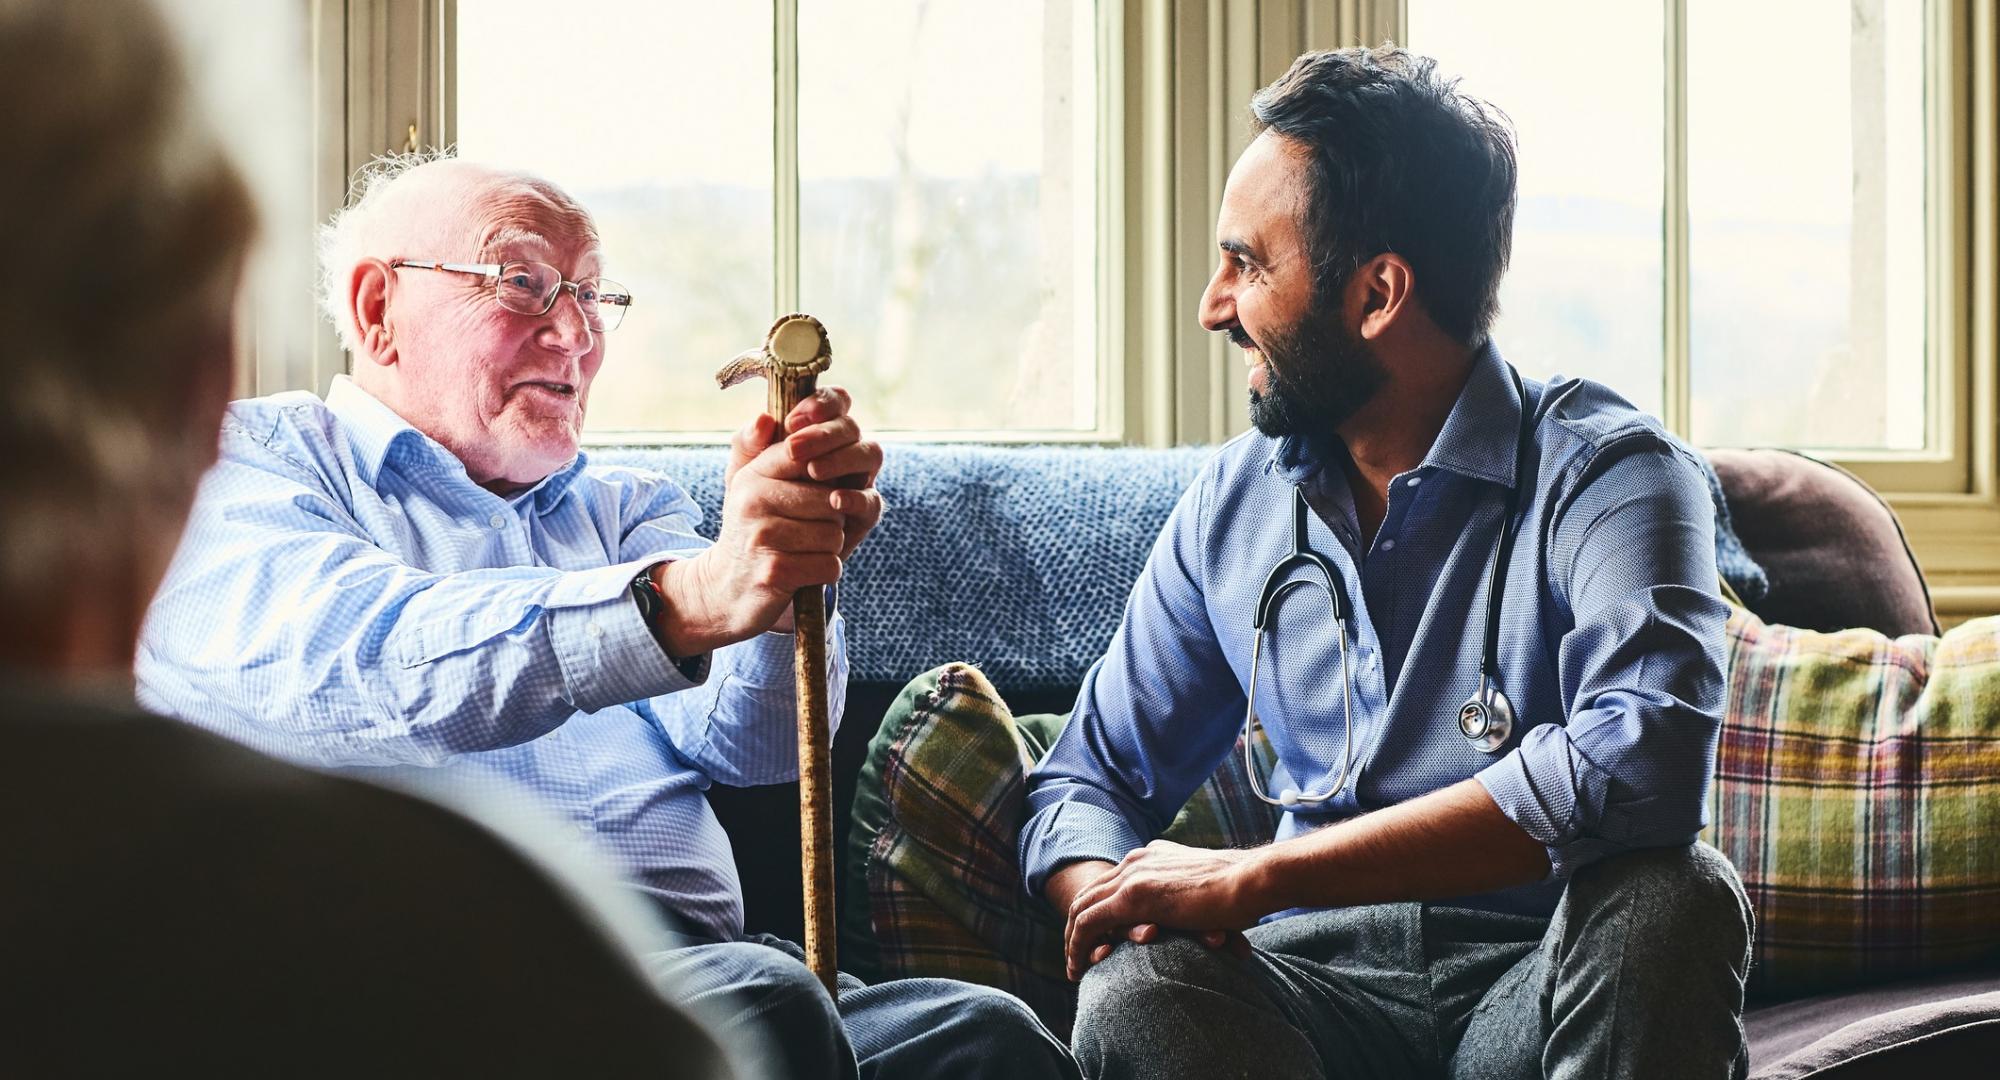 Elderly man with a cane talking with a male doctor